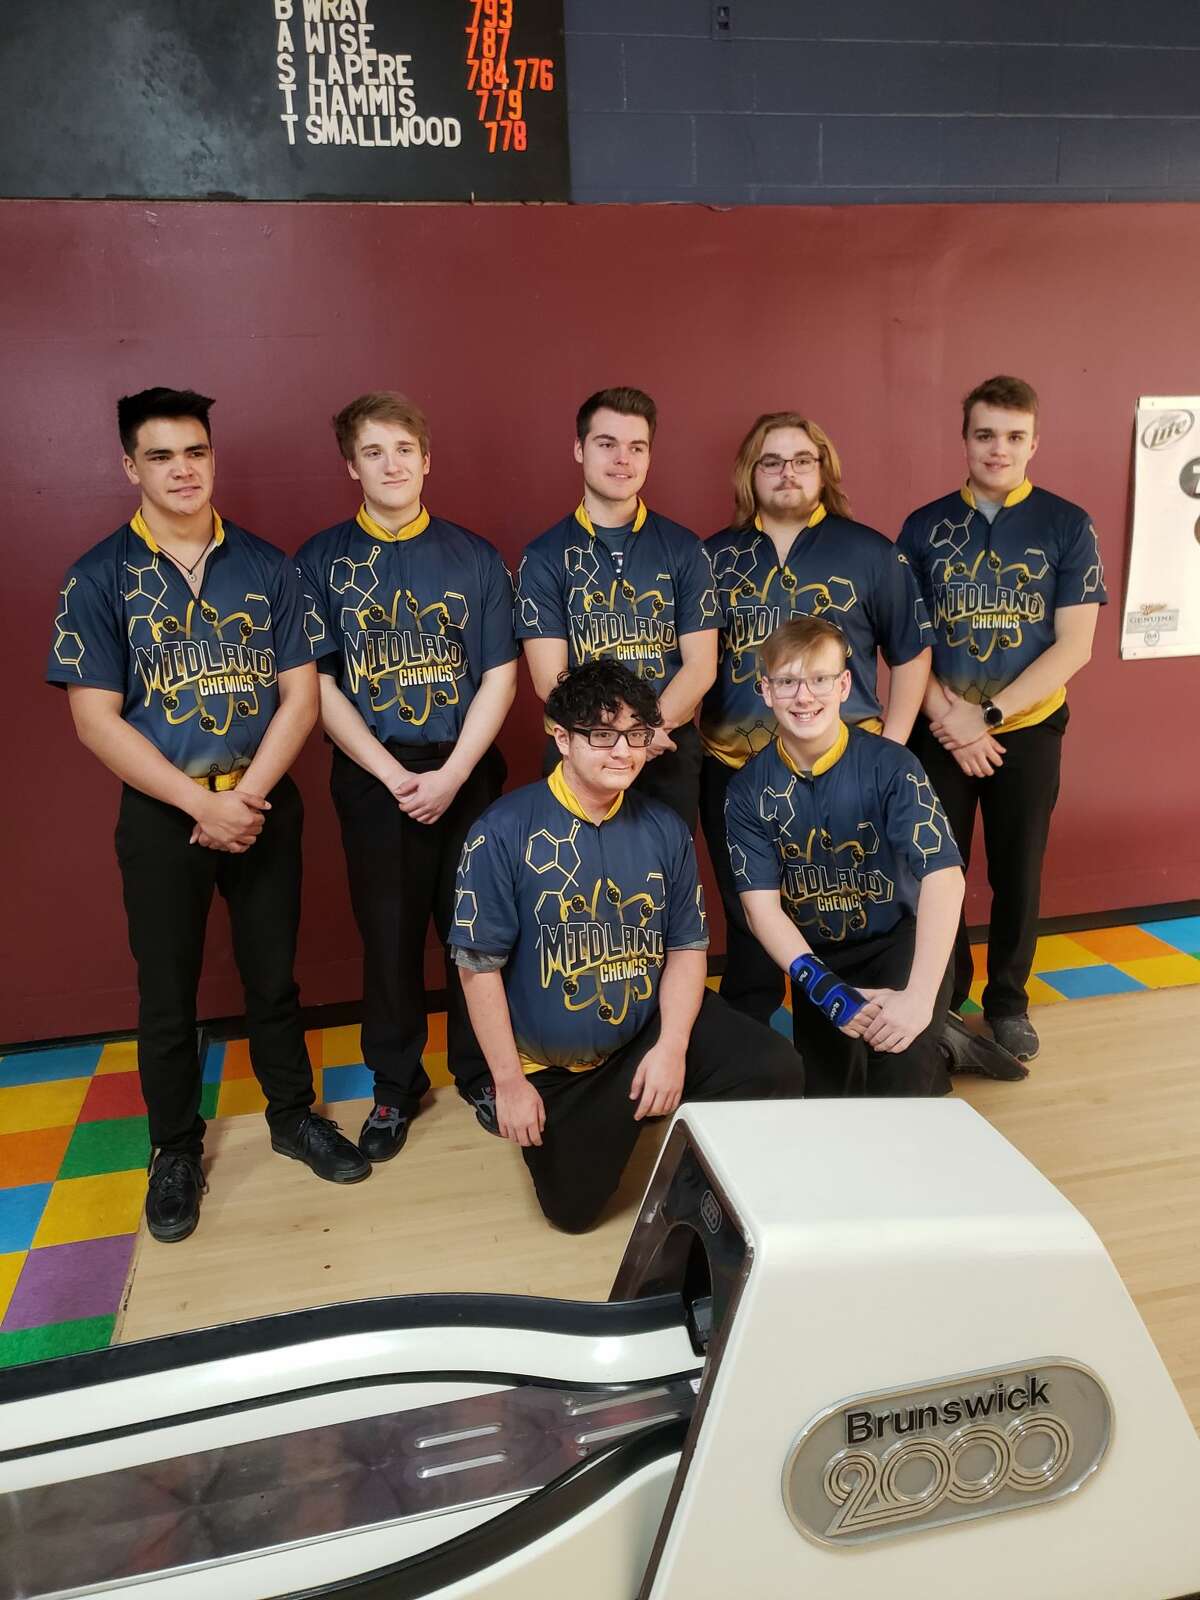 Pictured is the undefeated Midland High boys' bowling team: (front row, from left) Ruberto Mosqueda, Hunter Blackhurst; (back row, from left) Colin Terrill, Izaac Goergen, Nathan Miller, Eric Kalishek, Alex Kuzik.